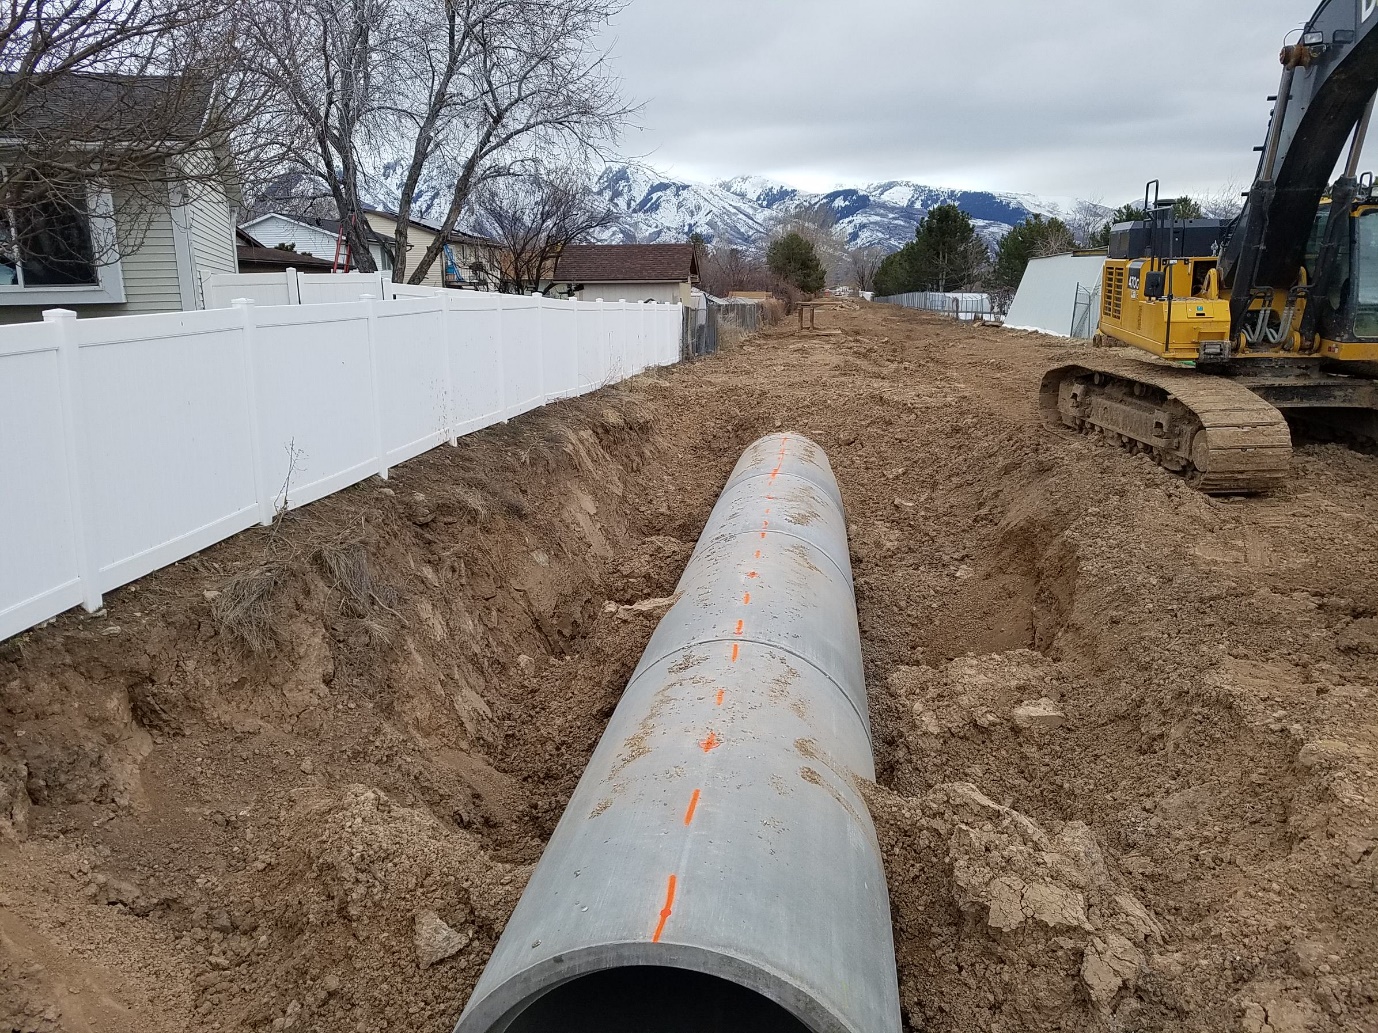 Davis and Weber Counties Canal Company’s Small Piping and Hydro Project in Utah, which was an FY 2018 Water and Energy Efficiency Grant project. Photo courtesy of Davis and Weber Counties Canal Company.